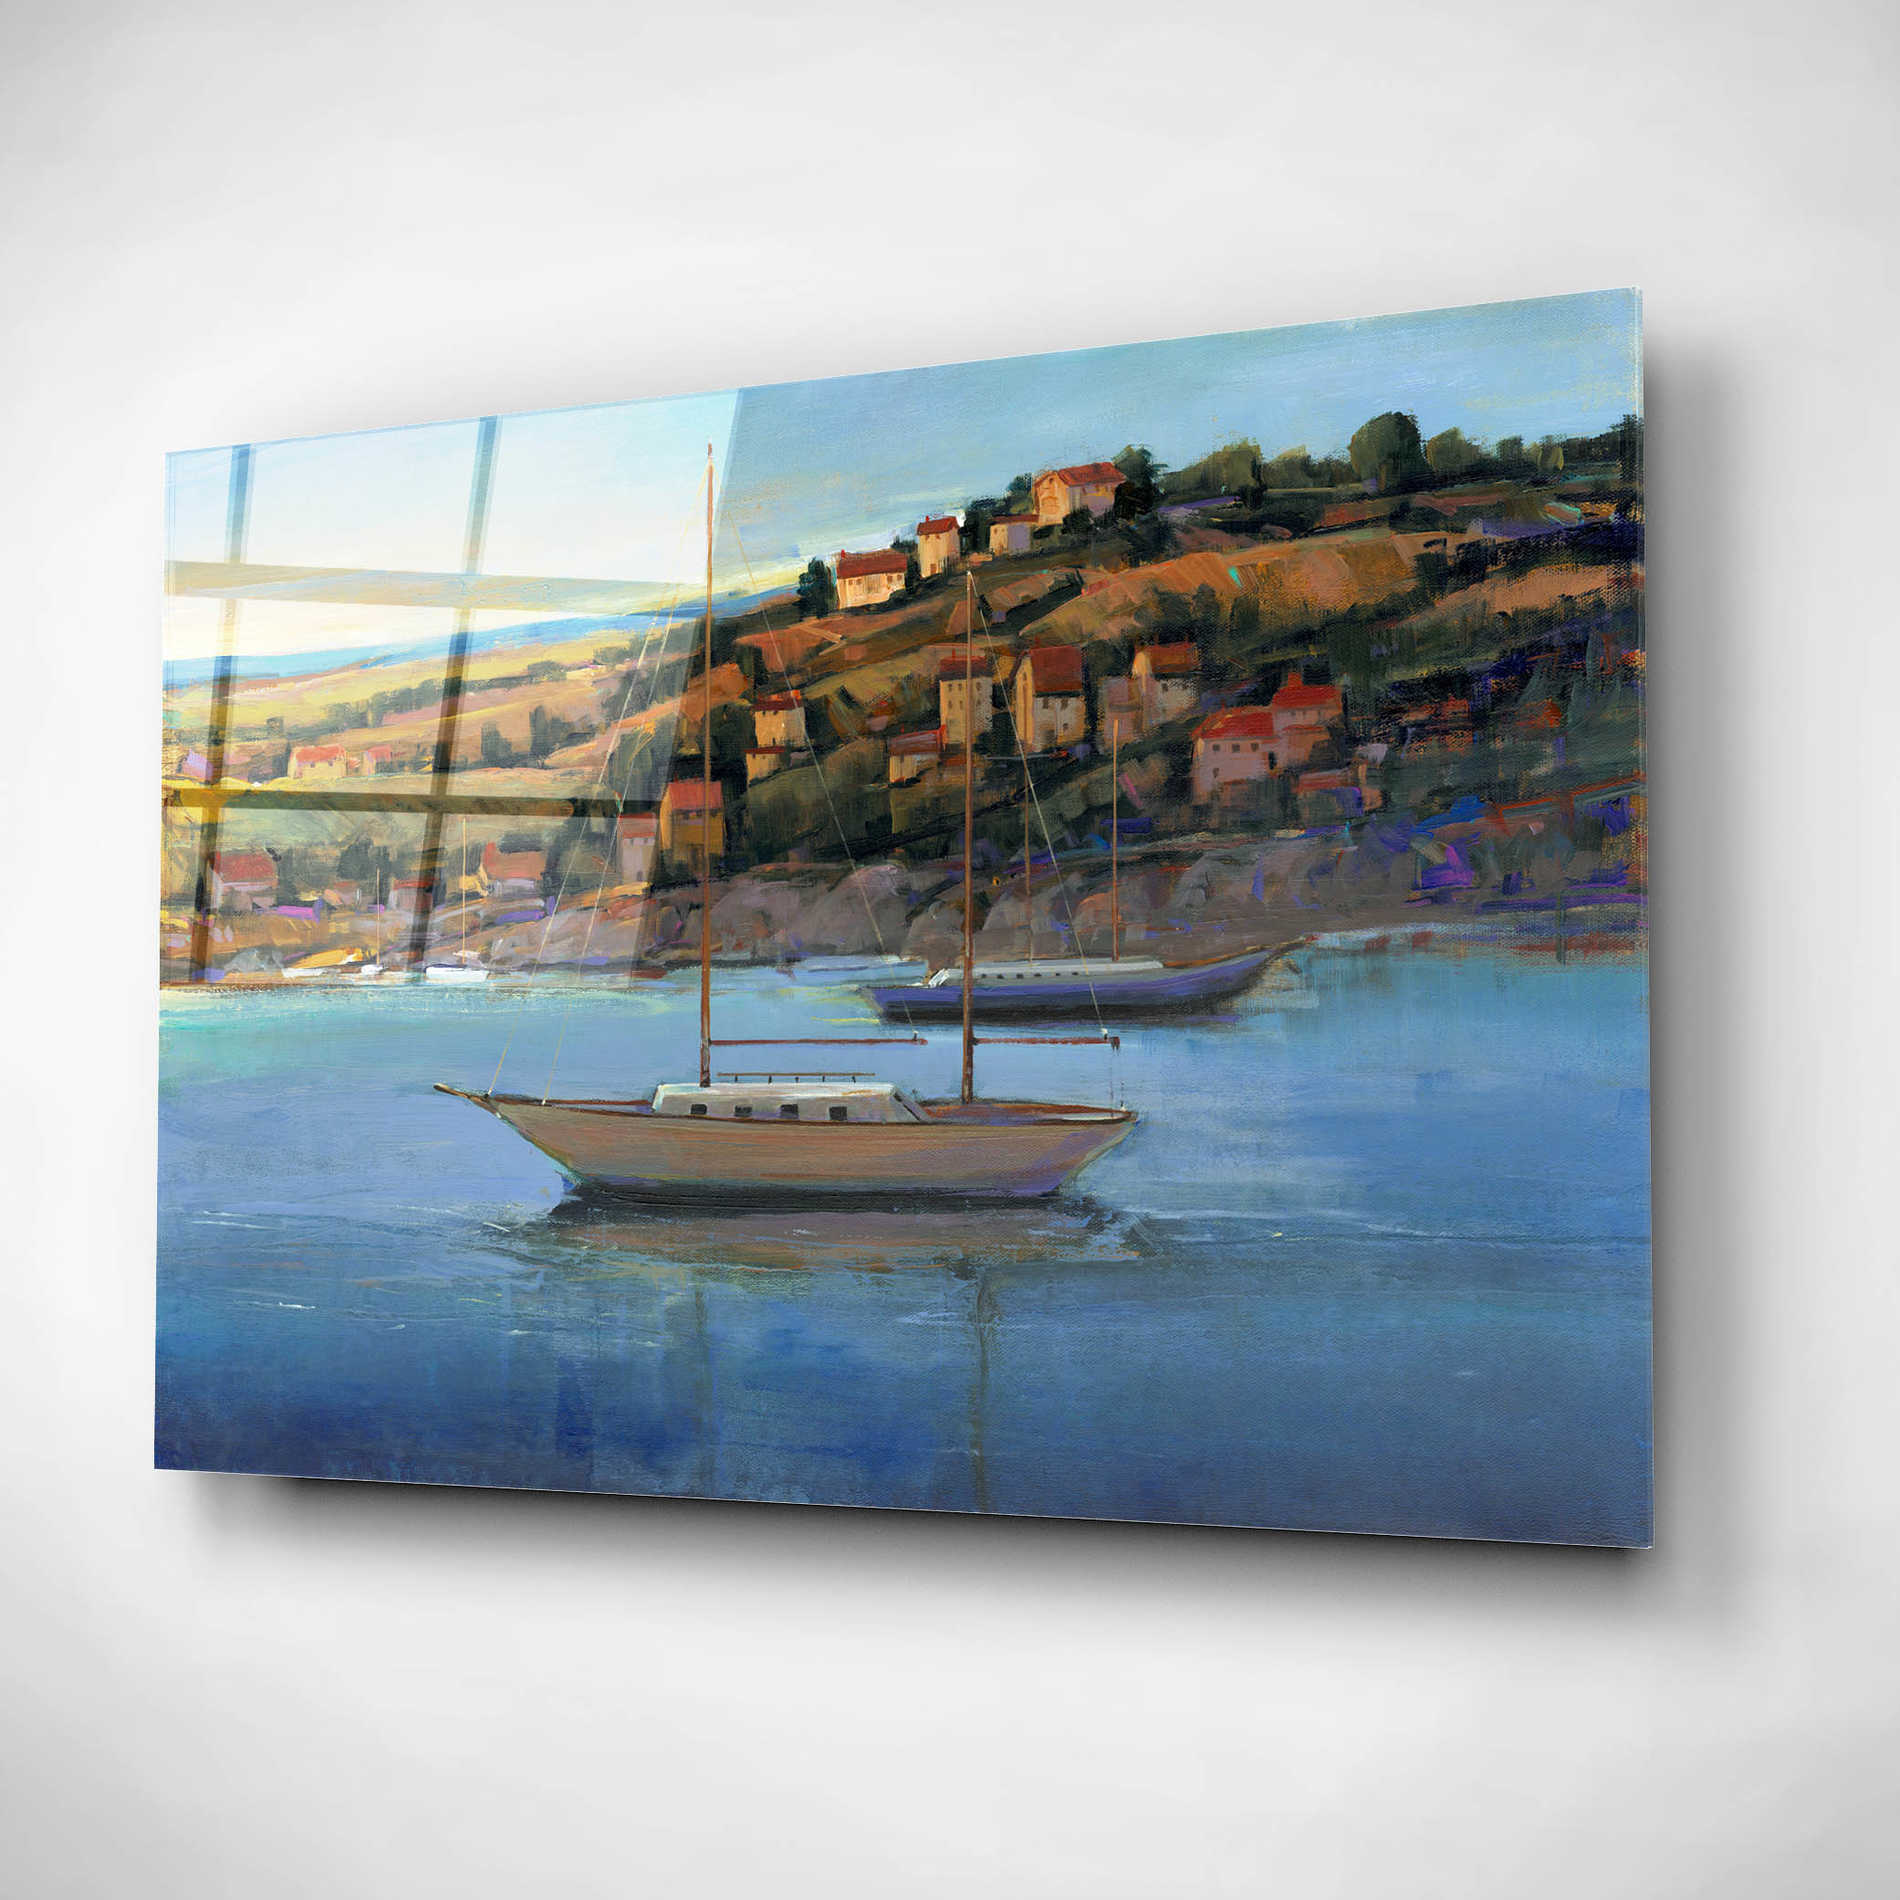 Epic Art 'Harbor View I' by Tim O'Toole, Acrylic Glass Wall Art,16x12